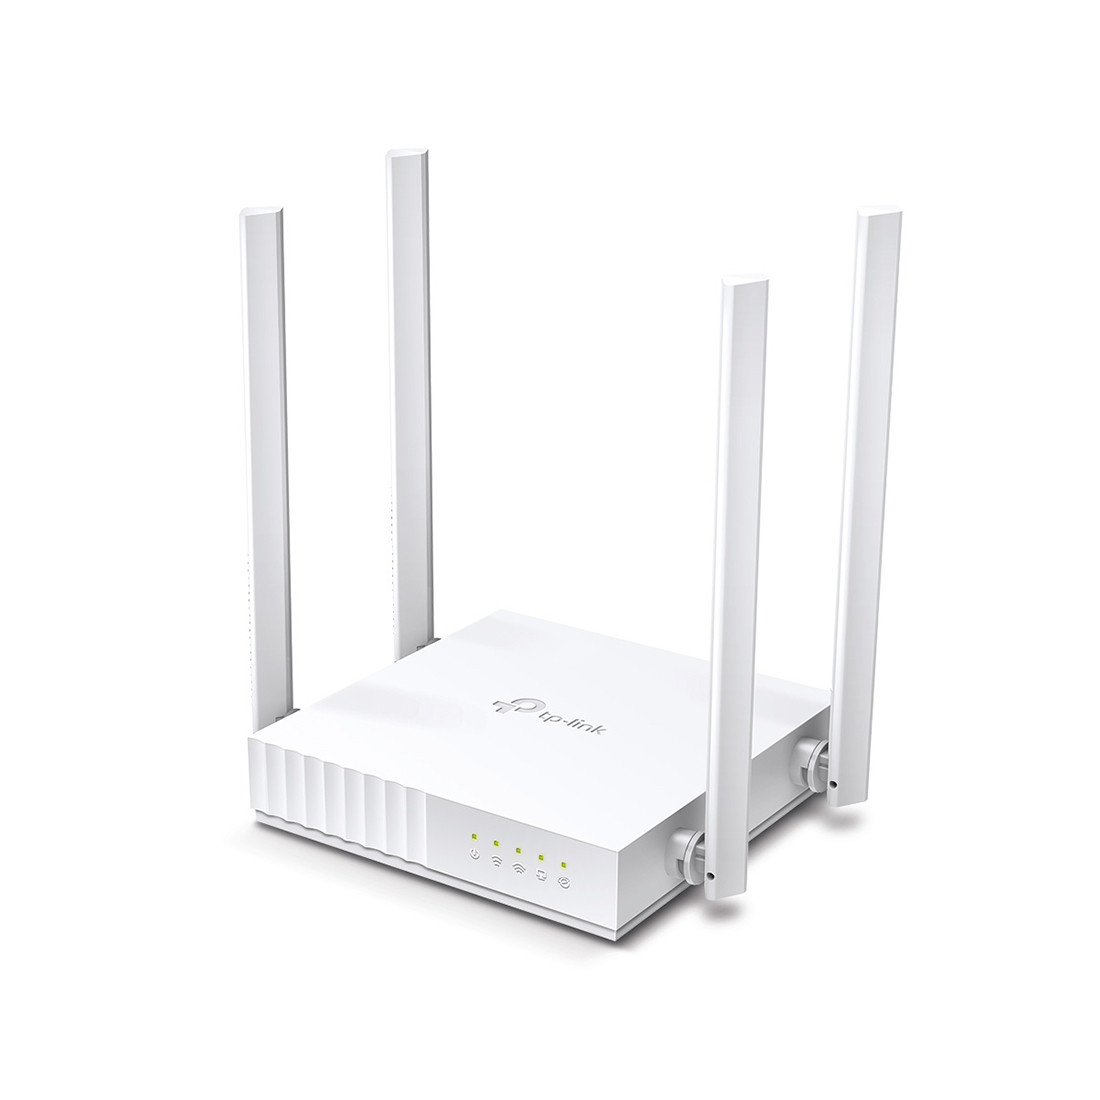 Маршрутизатор TP-Link Archer C24 2-005009